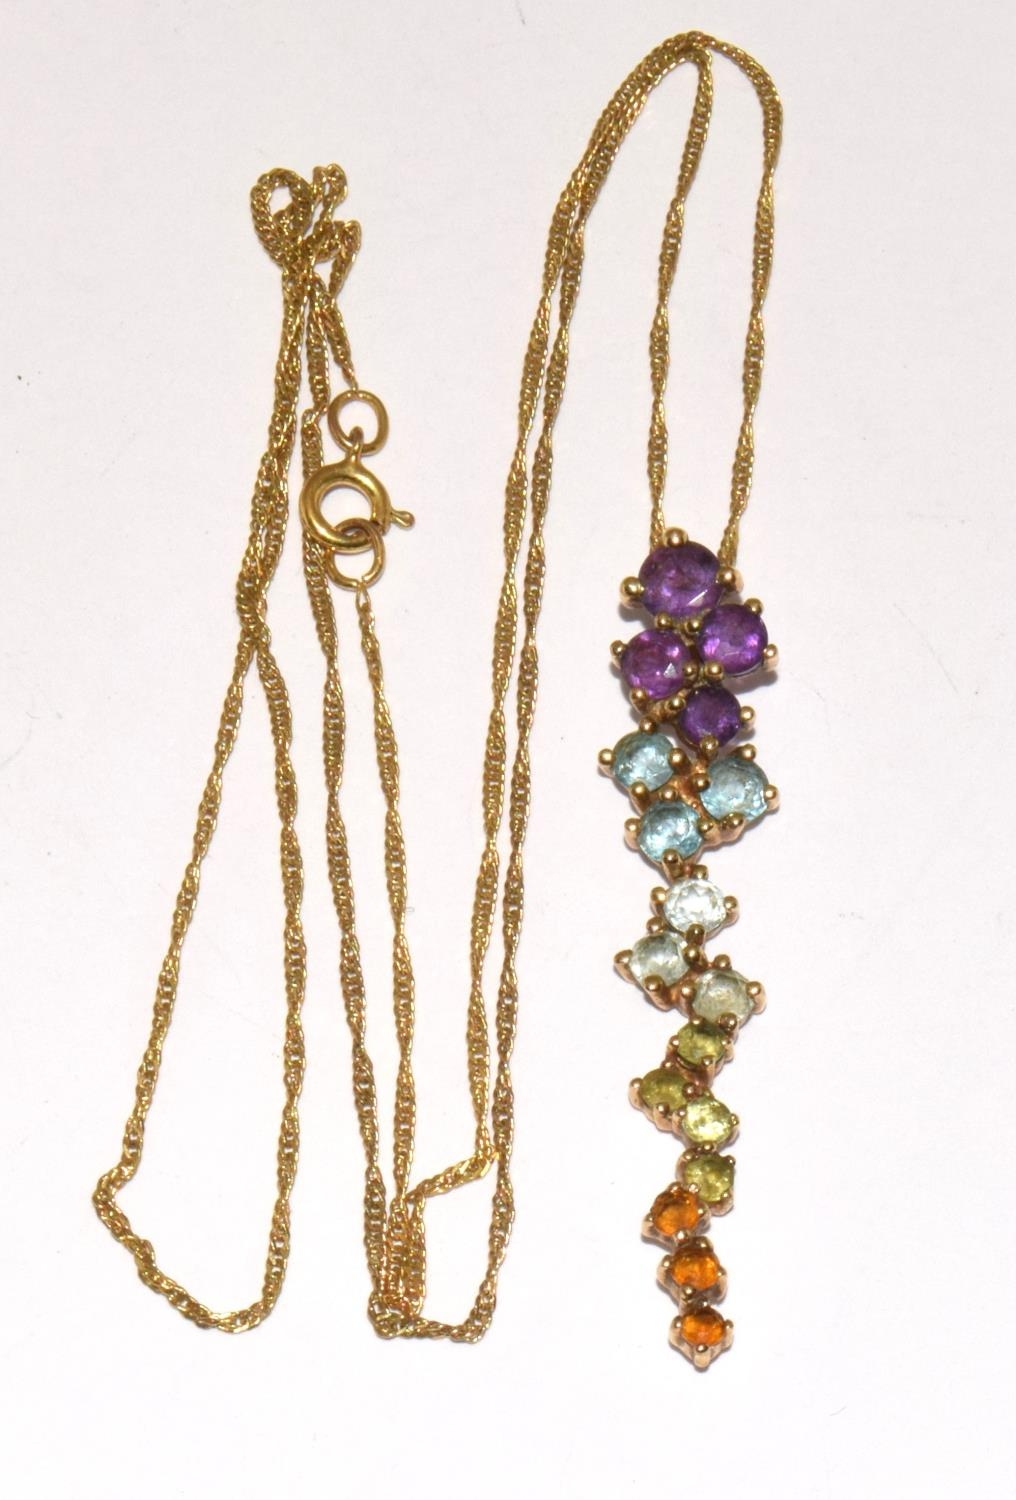 9ct gold Multi jem stone pendant necklace of Peridot, Topaz, Amethyst, and Citrine chain 46cm